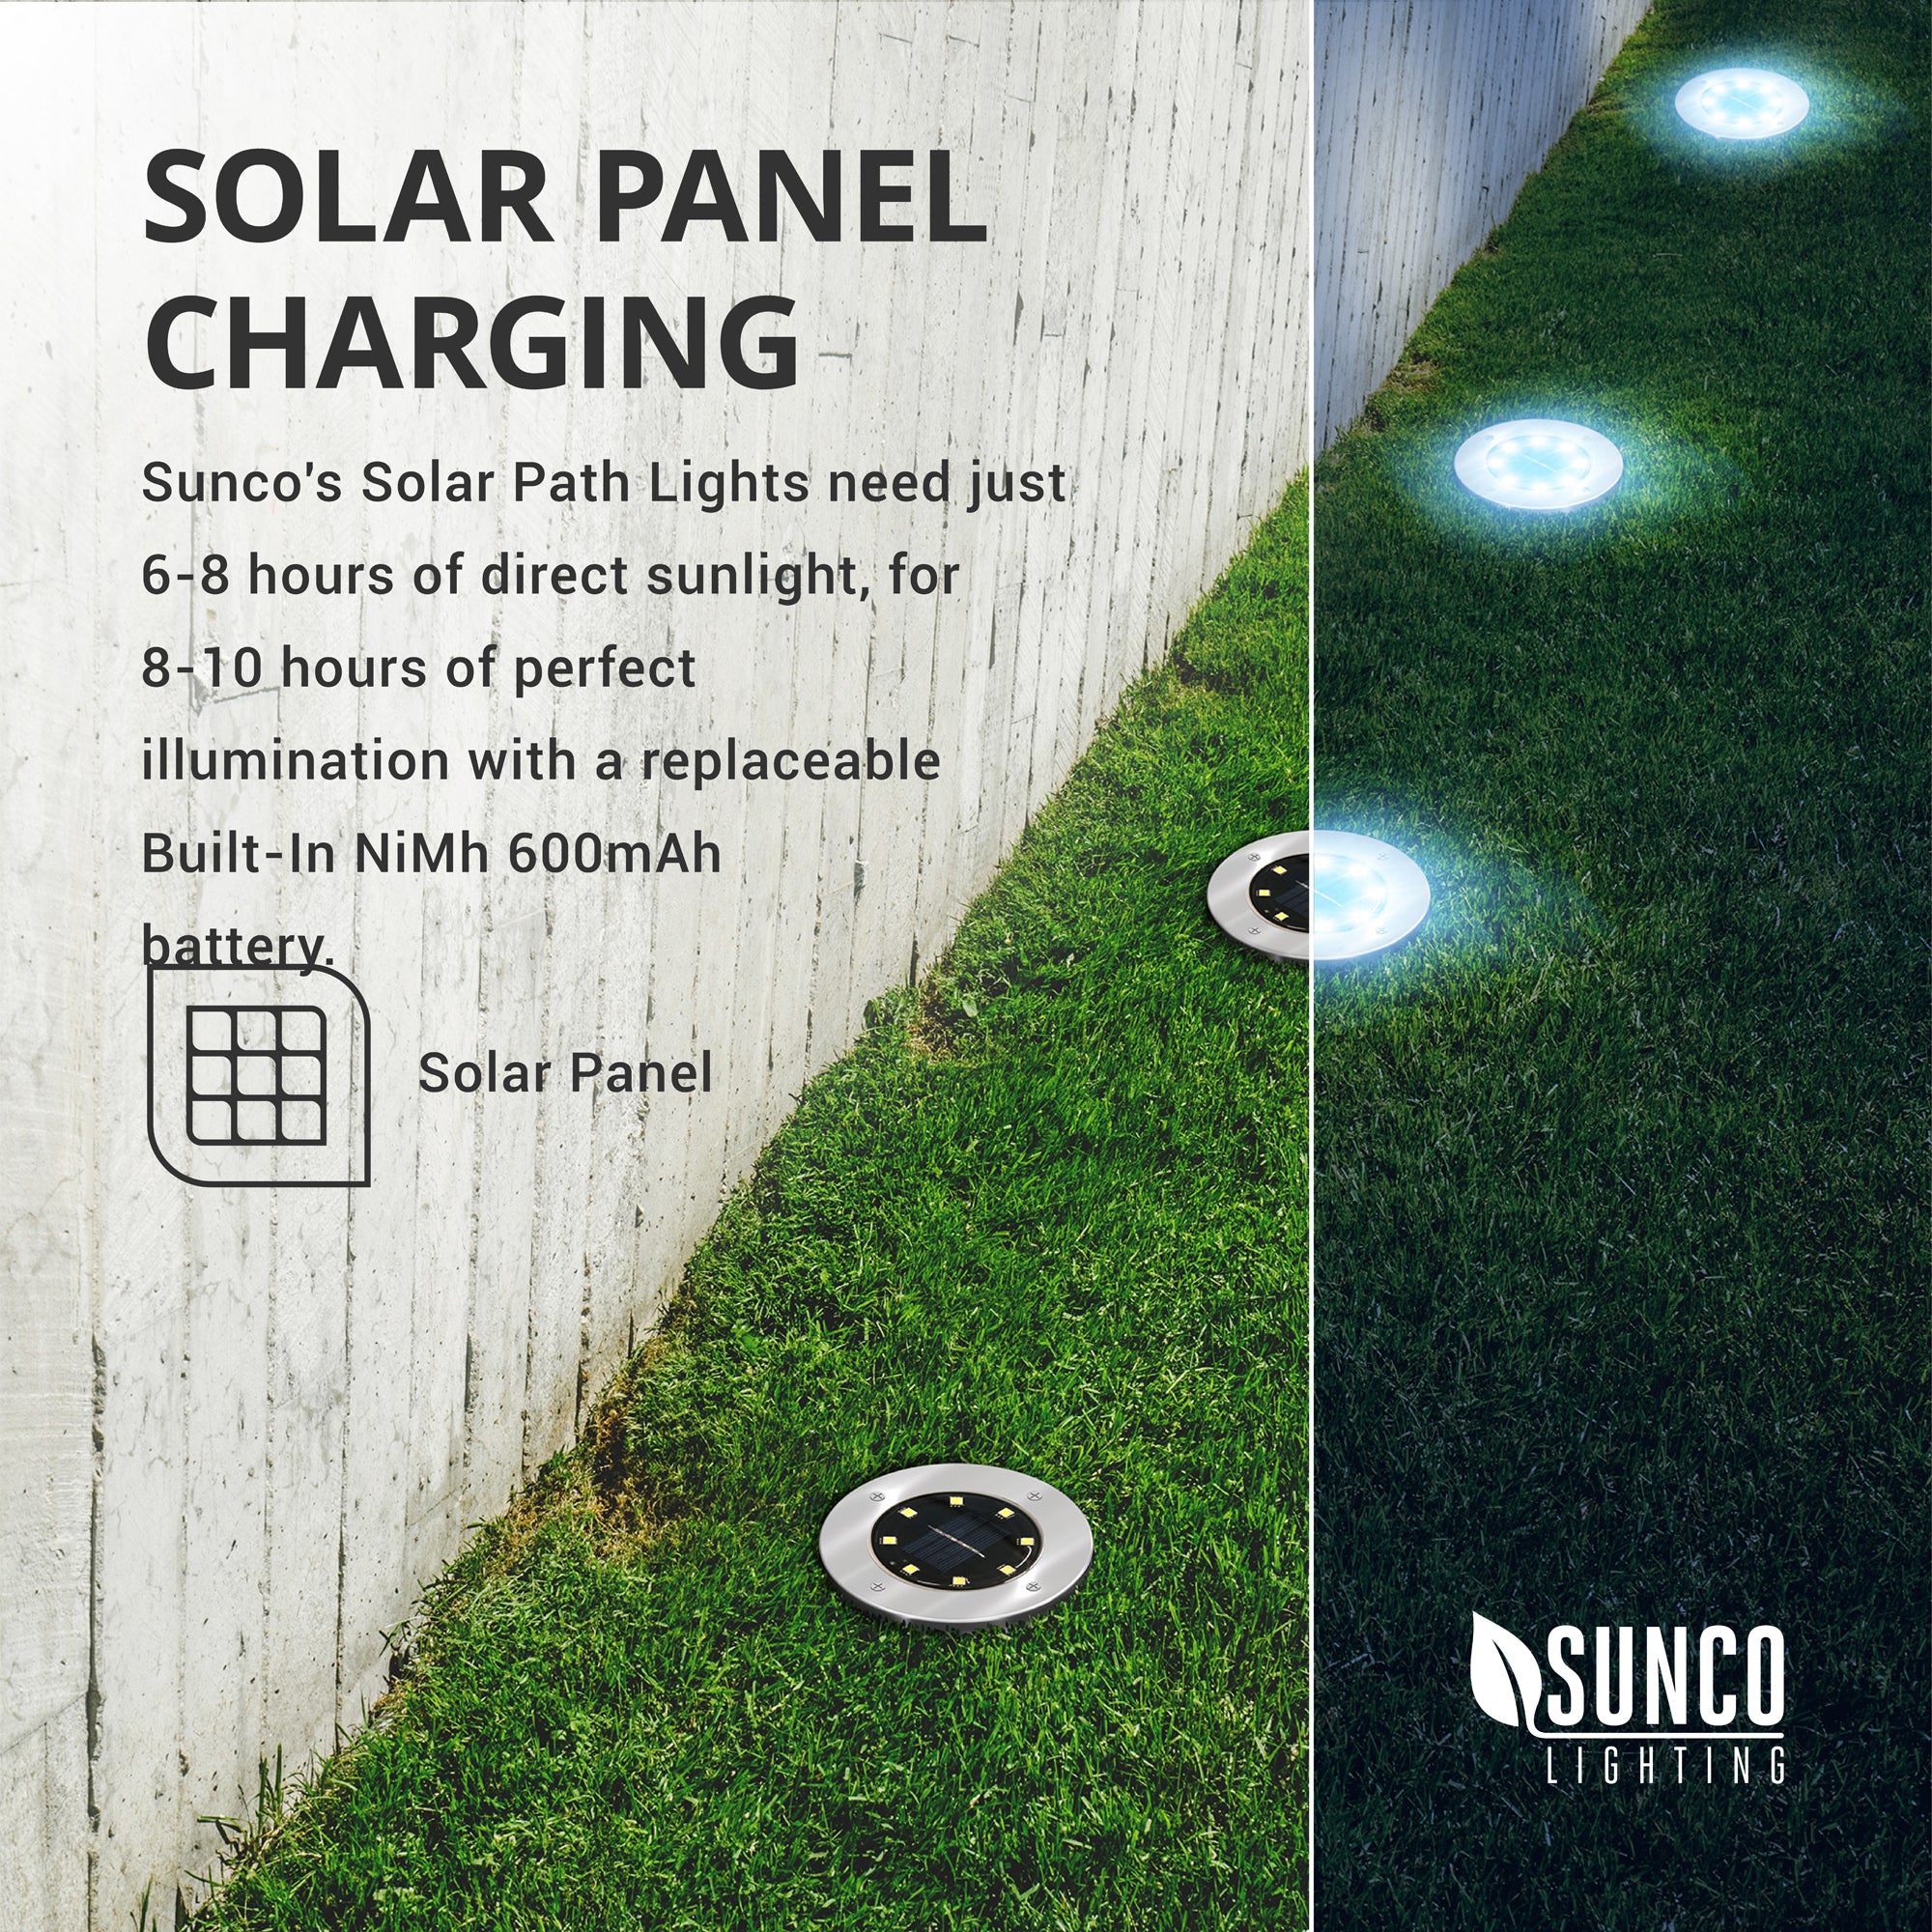 Sunco Lighting Round Solar Path Solar Panel Charging Light 6-8 Hours of Direct Sunlight Replace Built-In NiMh 600mAh Battery